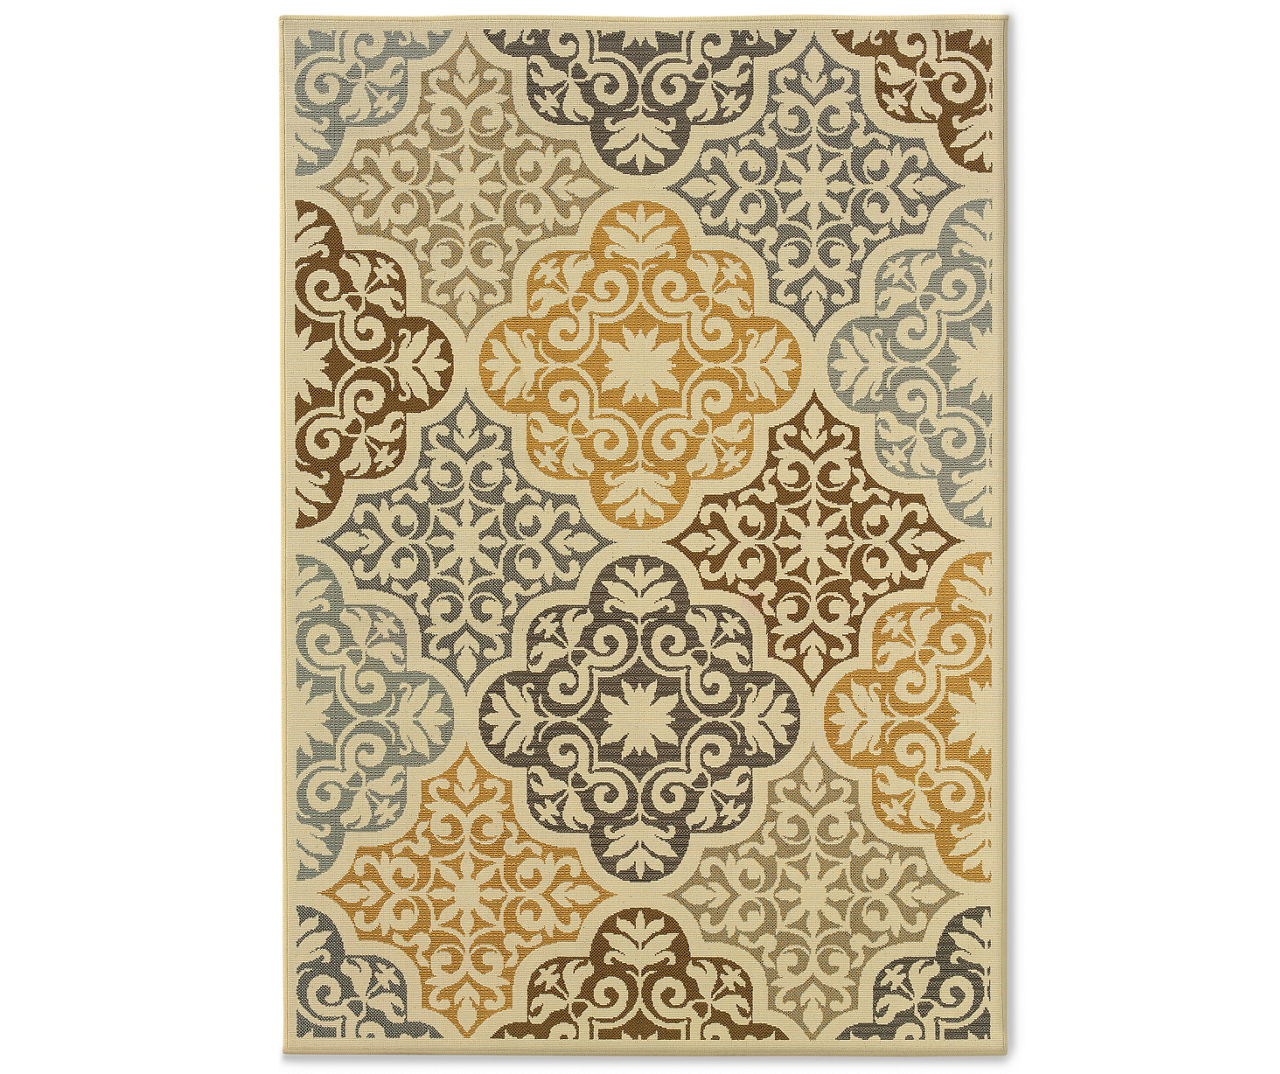 Gaines Warm White Outdoor Area Rug, (8'6" x 13')